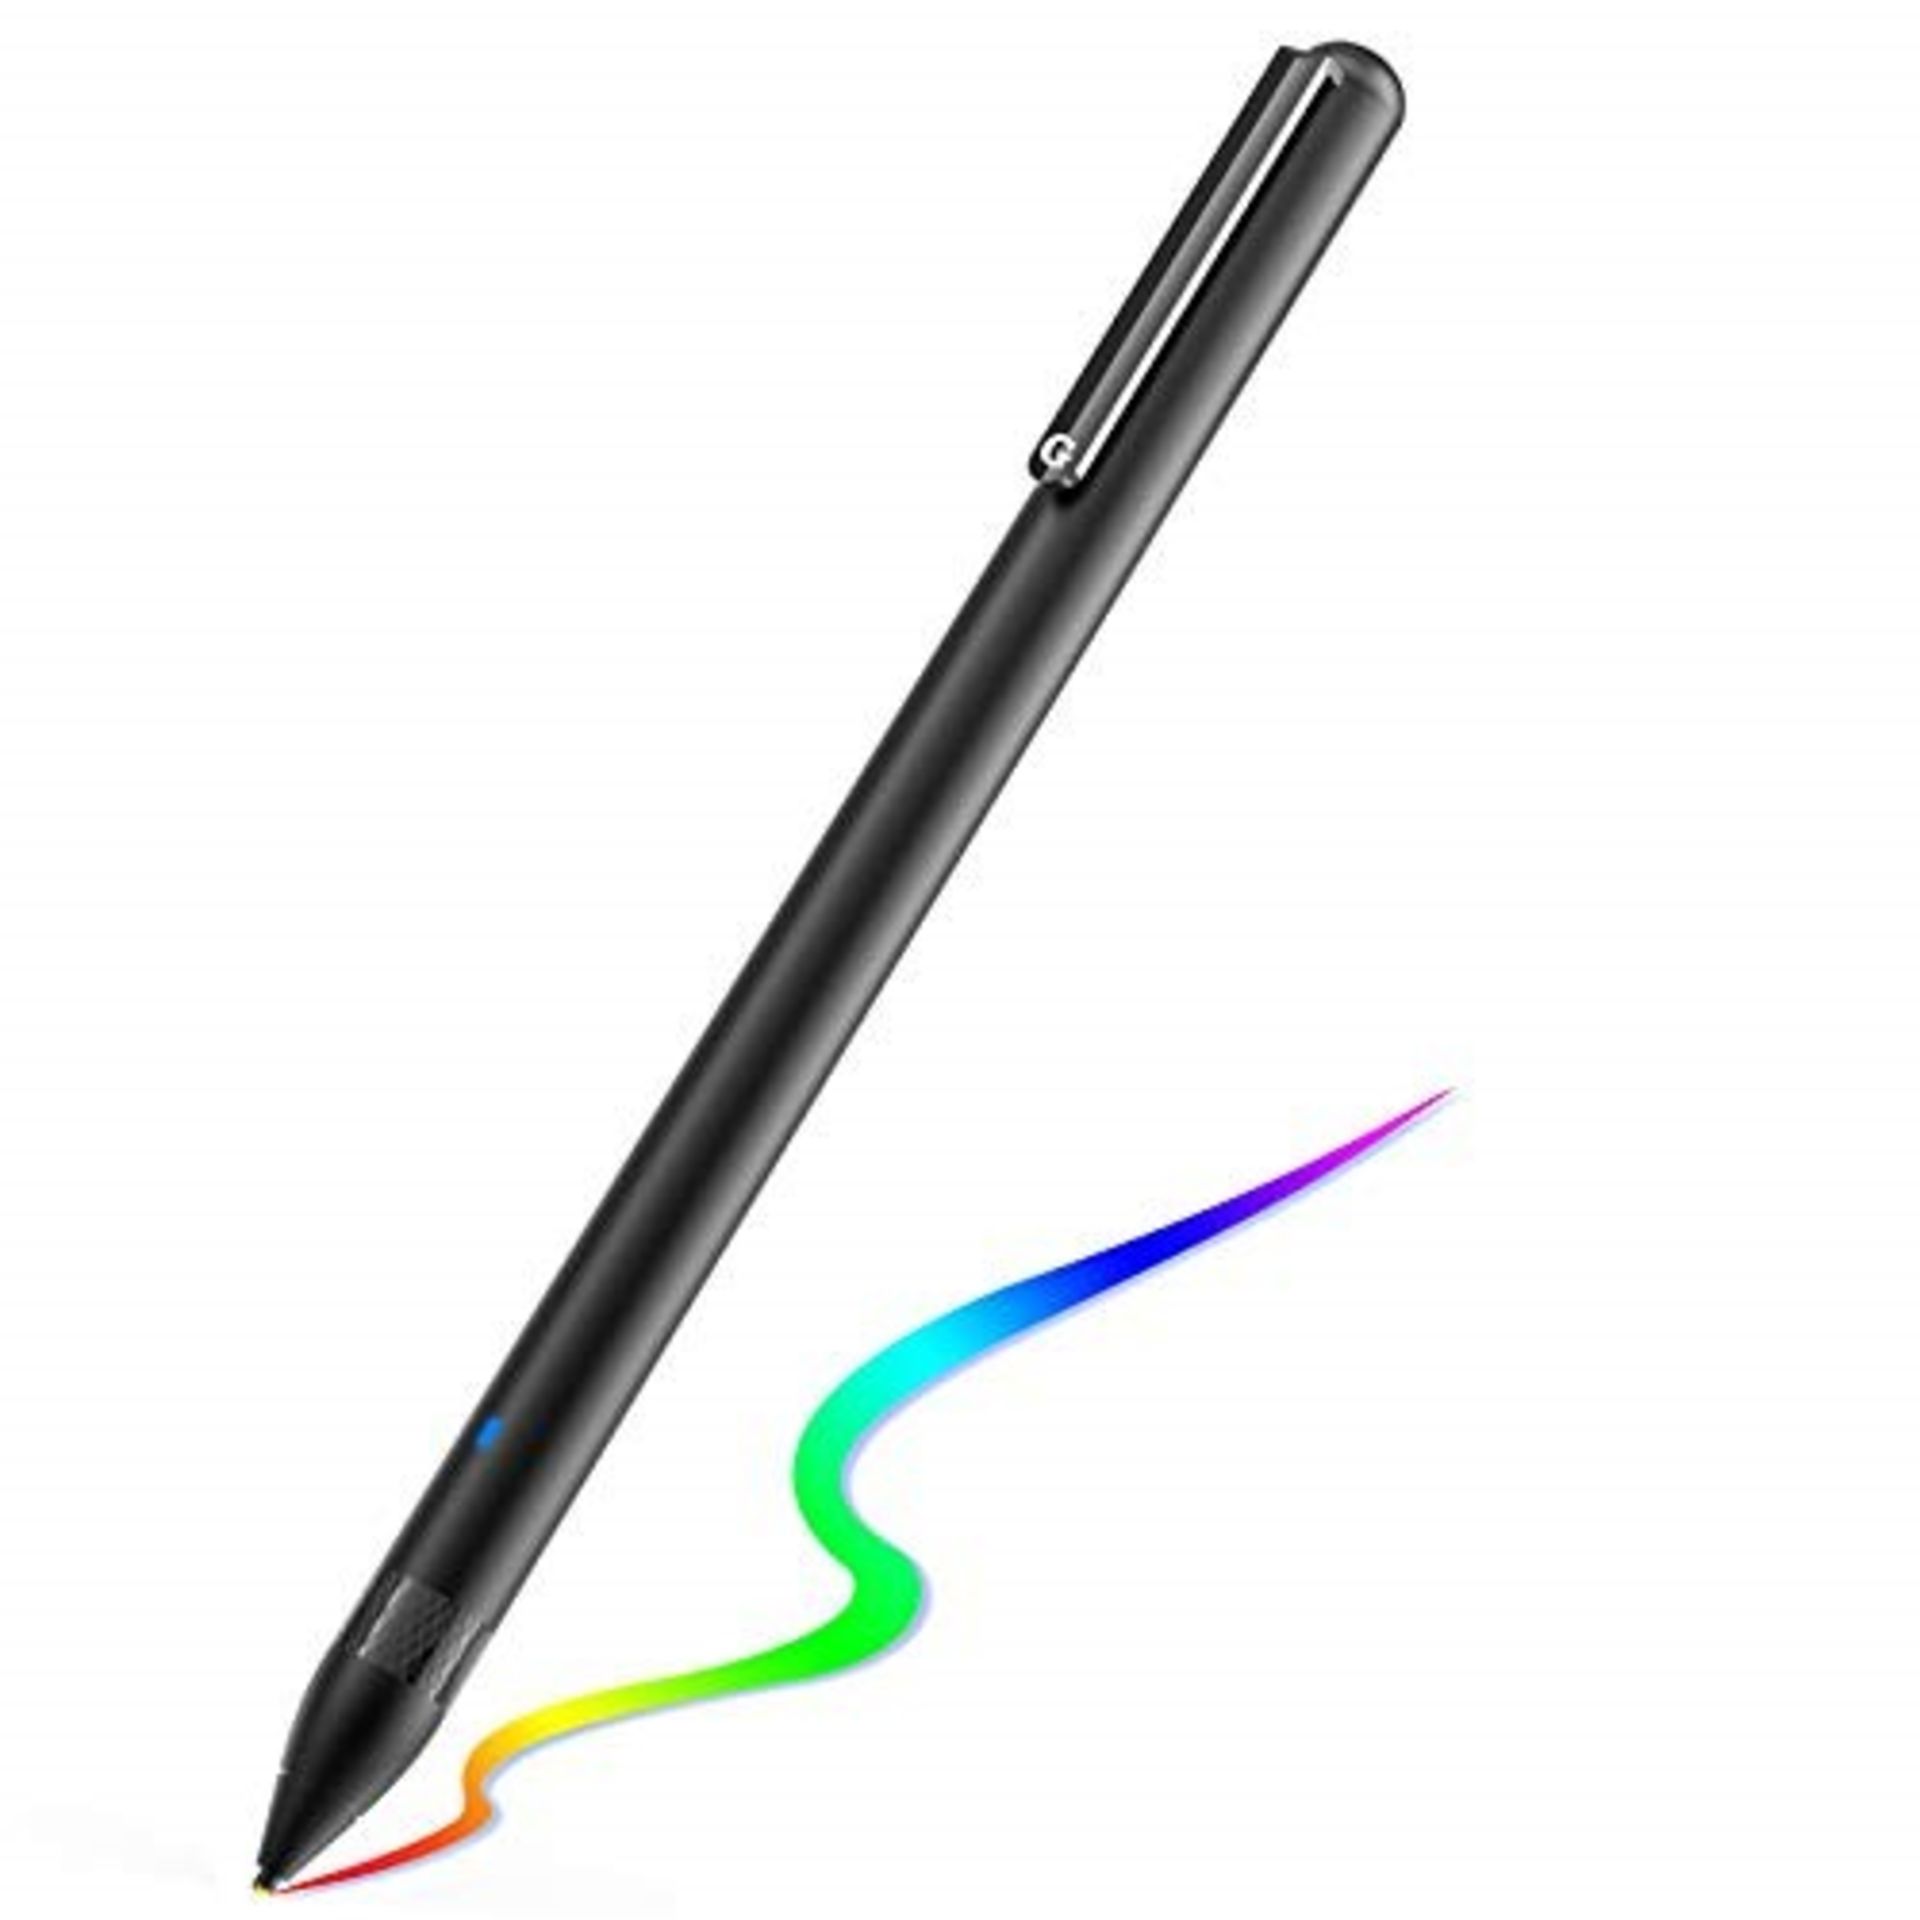 Active stylus pen for all touch screens. Recharg